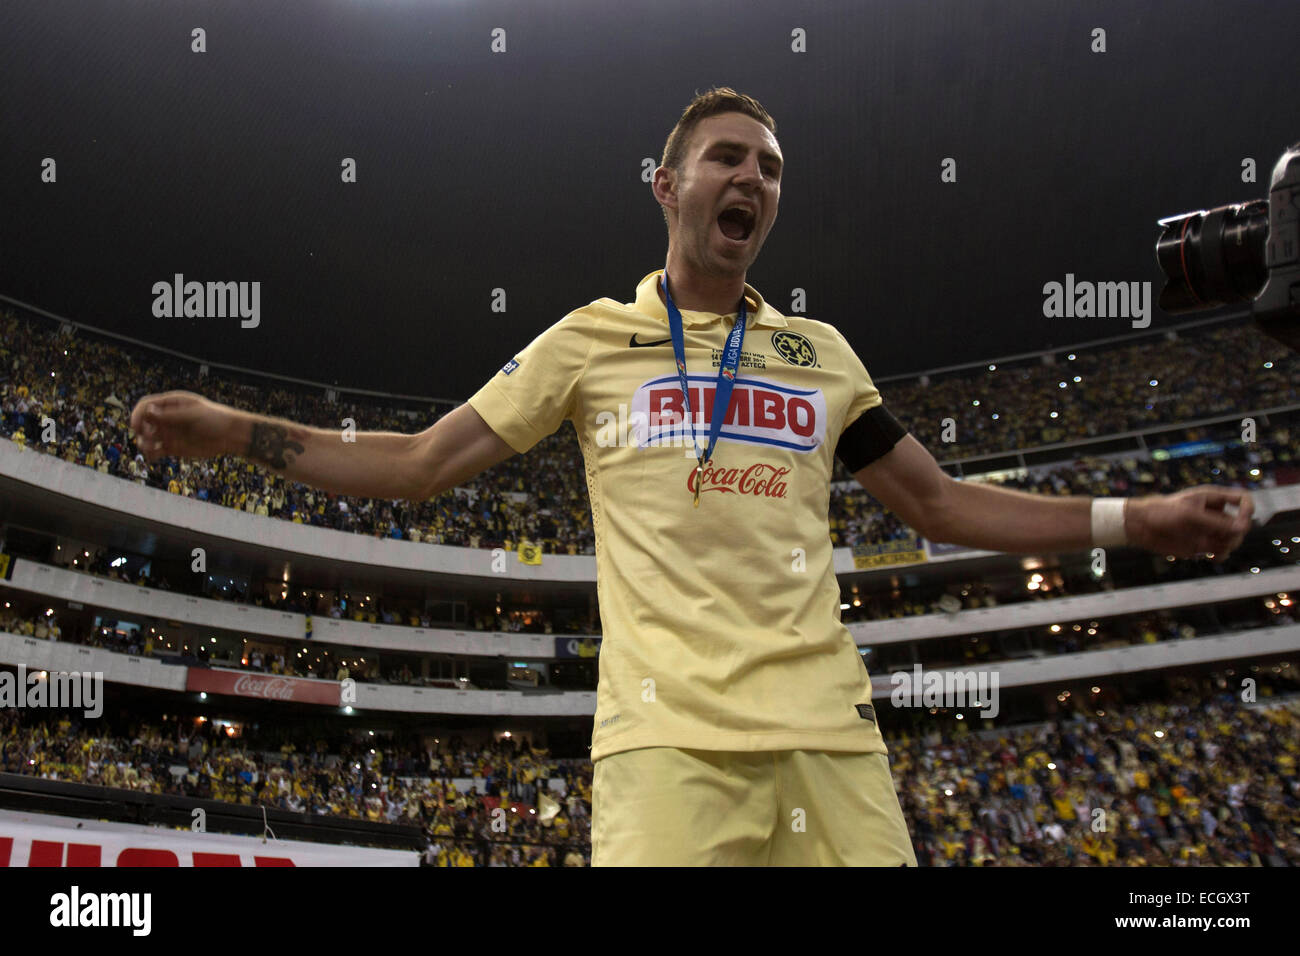 Mexico City, Mexico. 14th Dec, 2014. America's Miguel Layun celebrates at the end of the return match of the Final of the 2014 Opening Tournament of the MX League against Tigres in the Azteca Stadium in Mexico City, capital of Mexico, on Dec. 14, 2014. © Alejandro Ayala/Xinhua/Alamy Live News Stock Photo